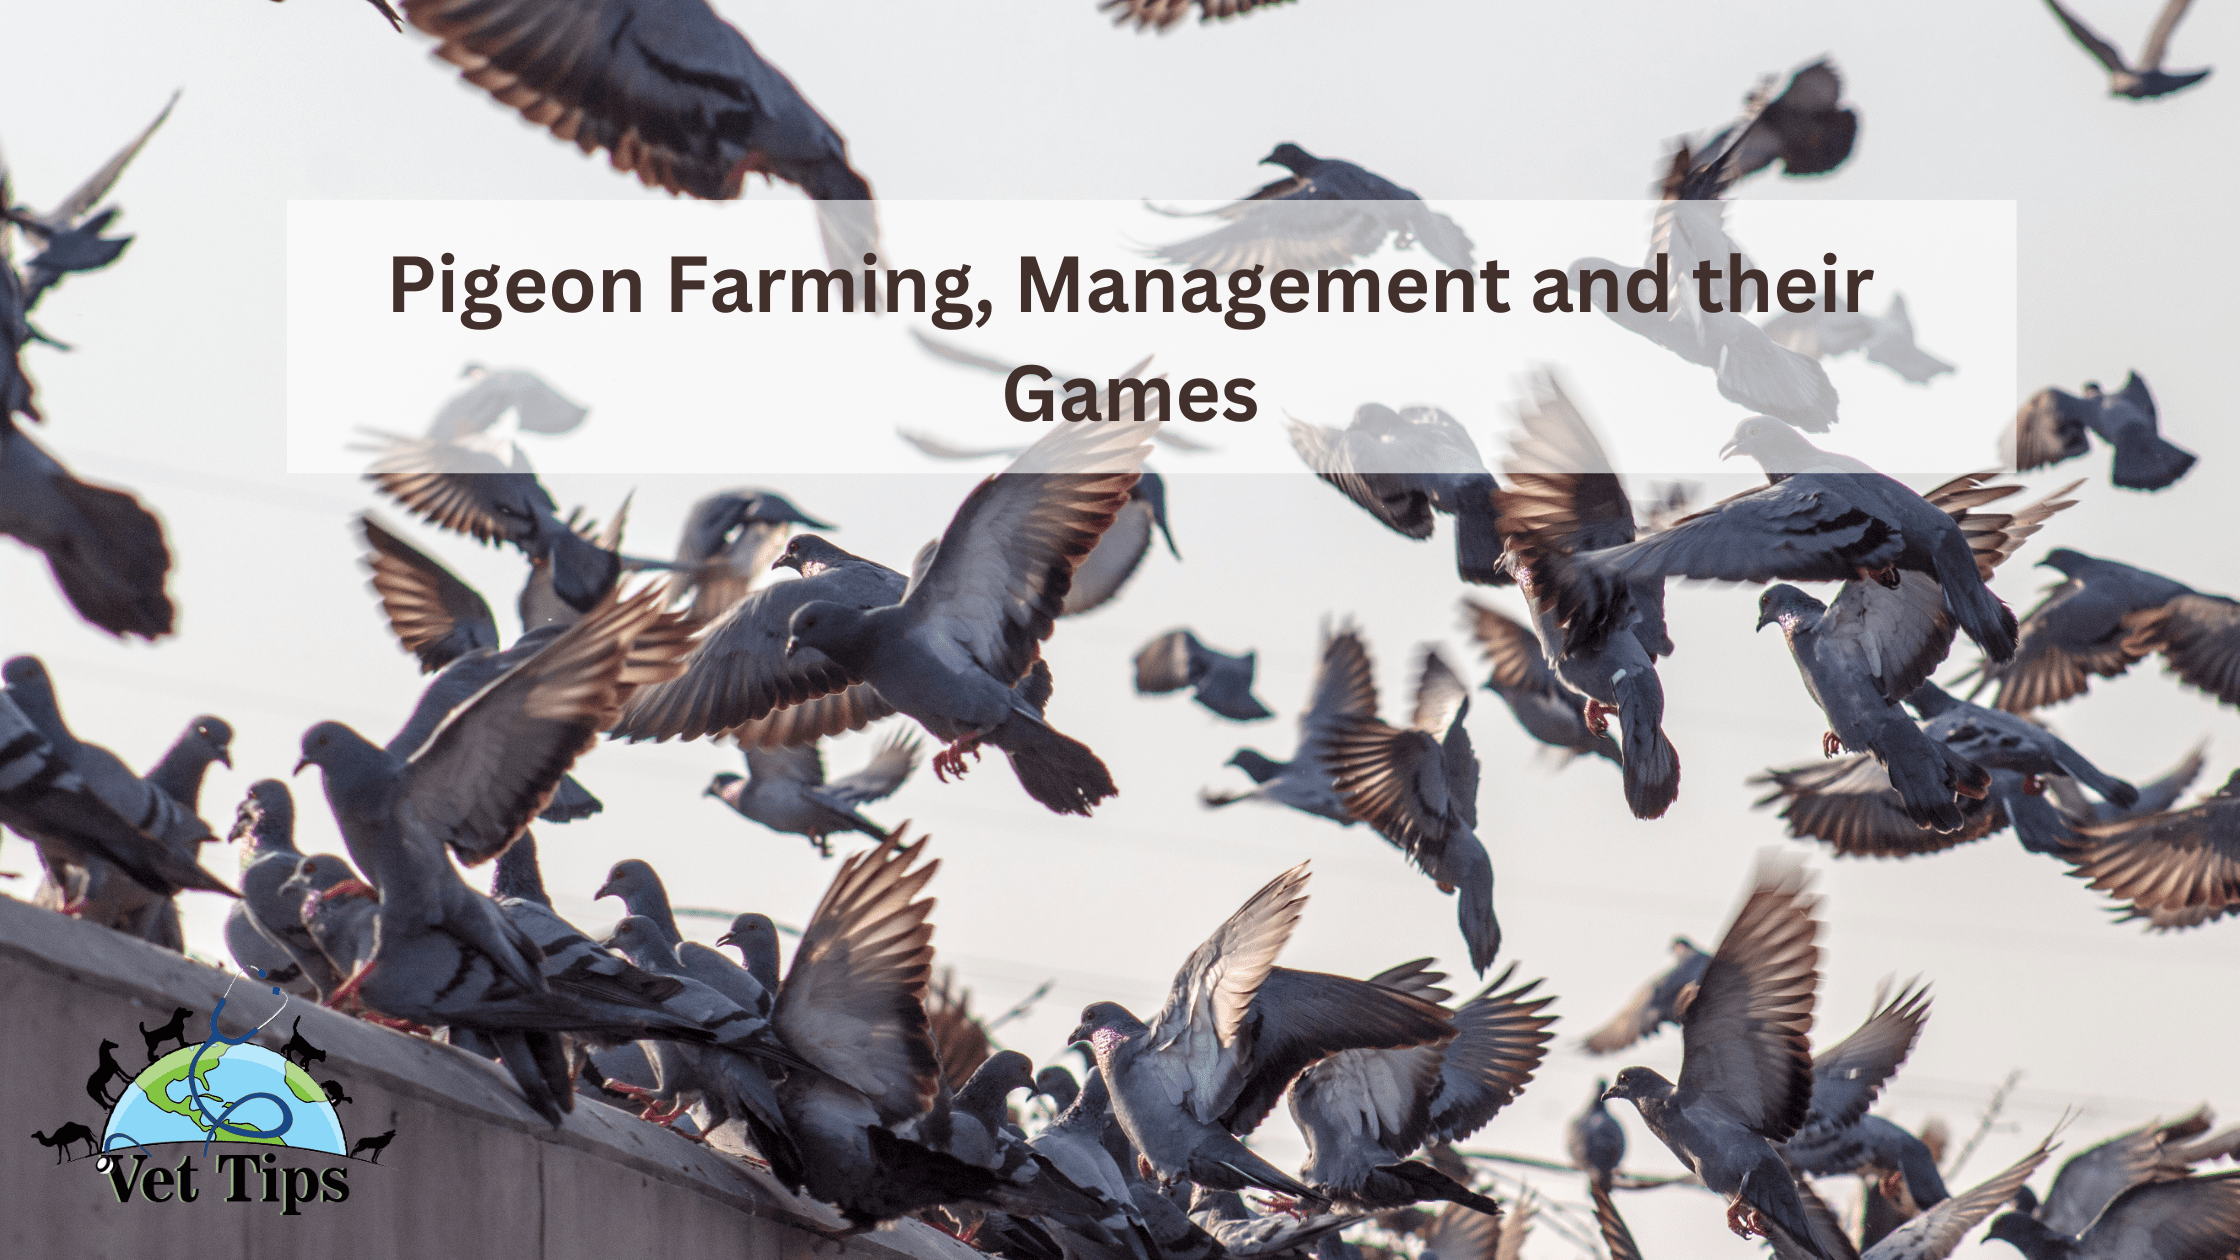 Pigeon Farming, Management and their Games